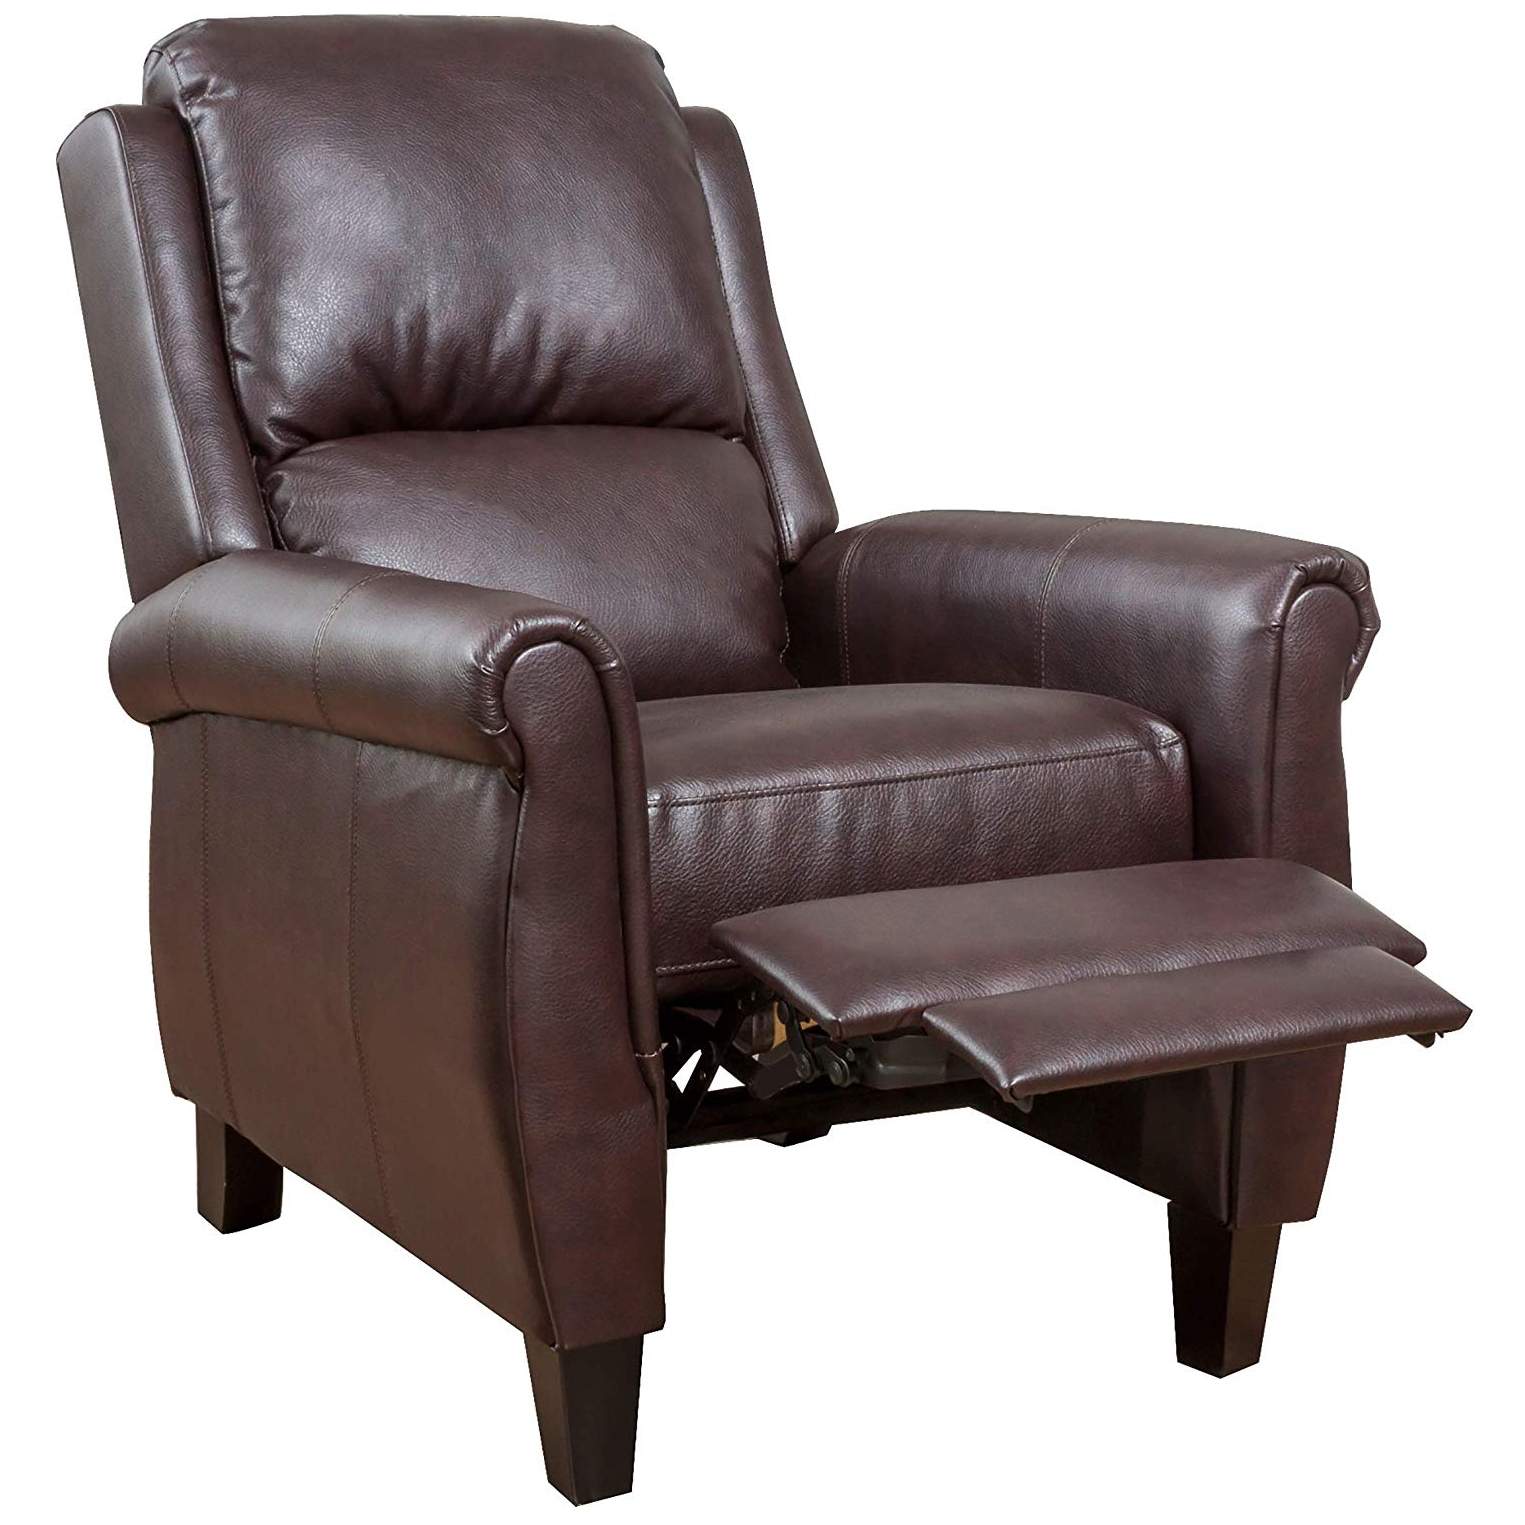 Christopher Knight Home Evan Pansy Recliner Club Chair